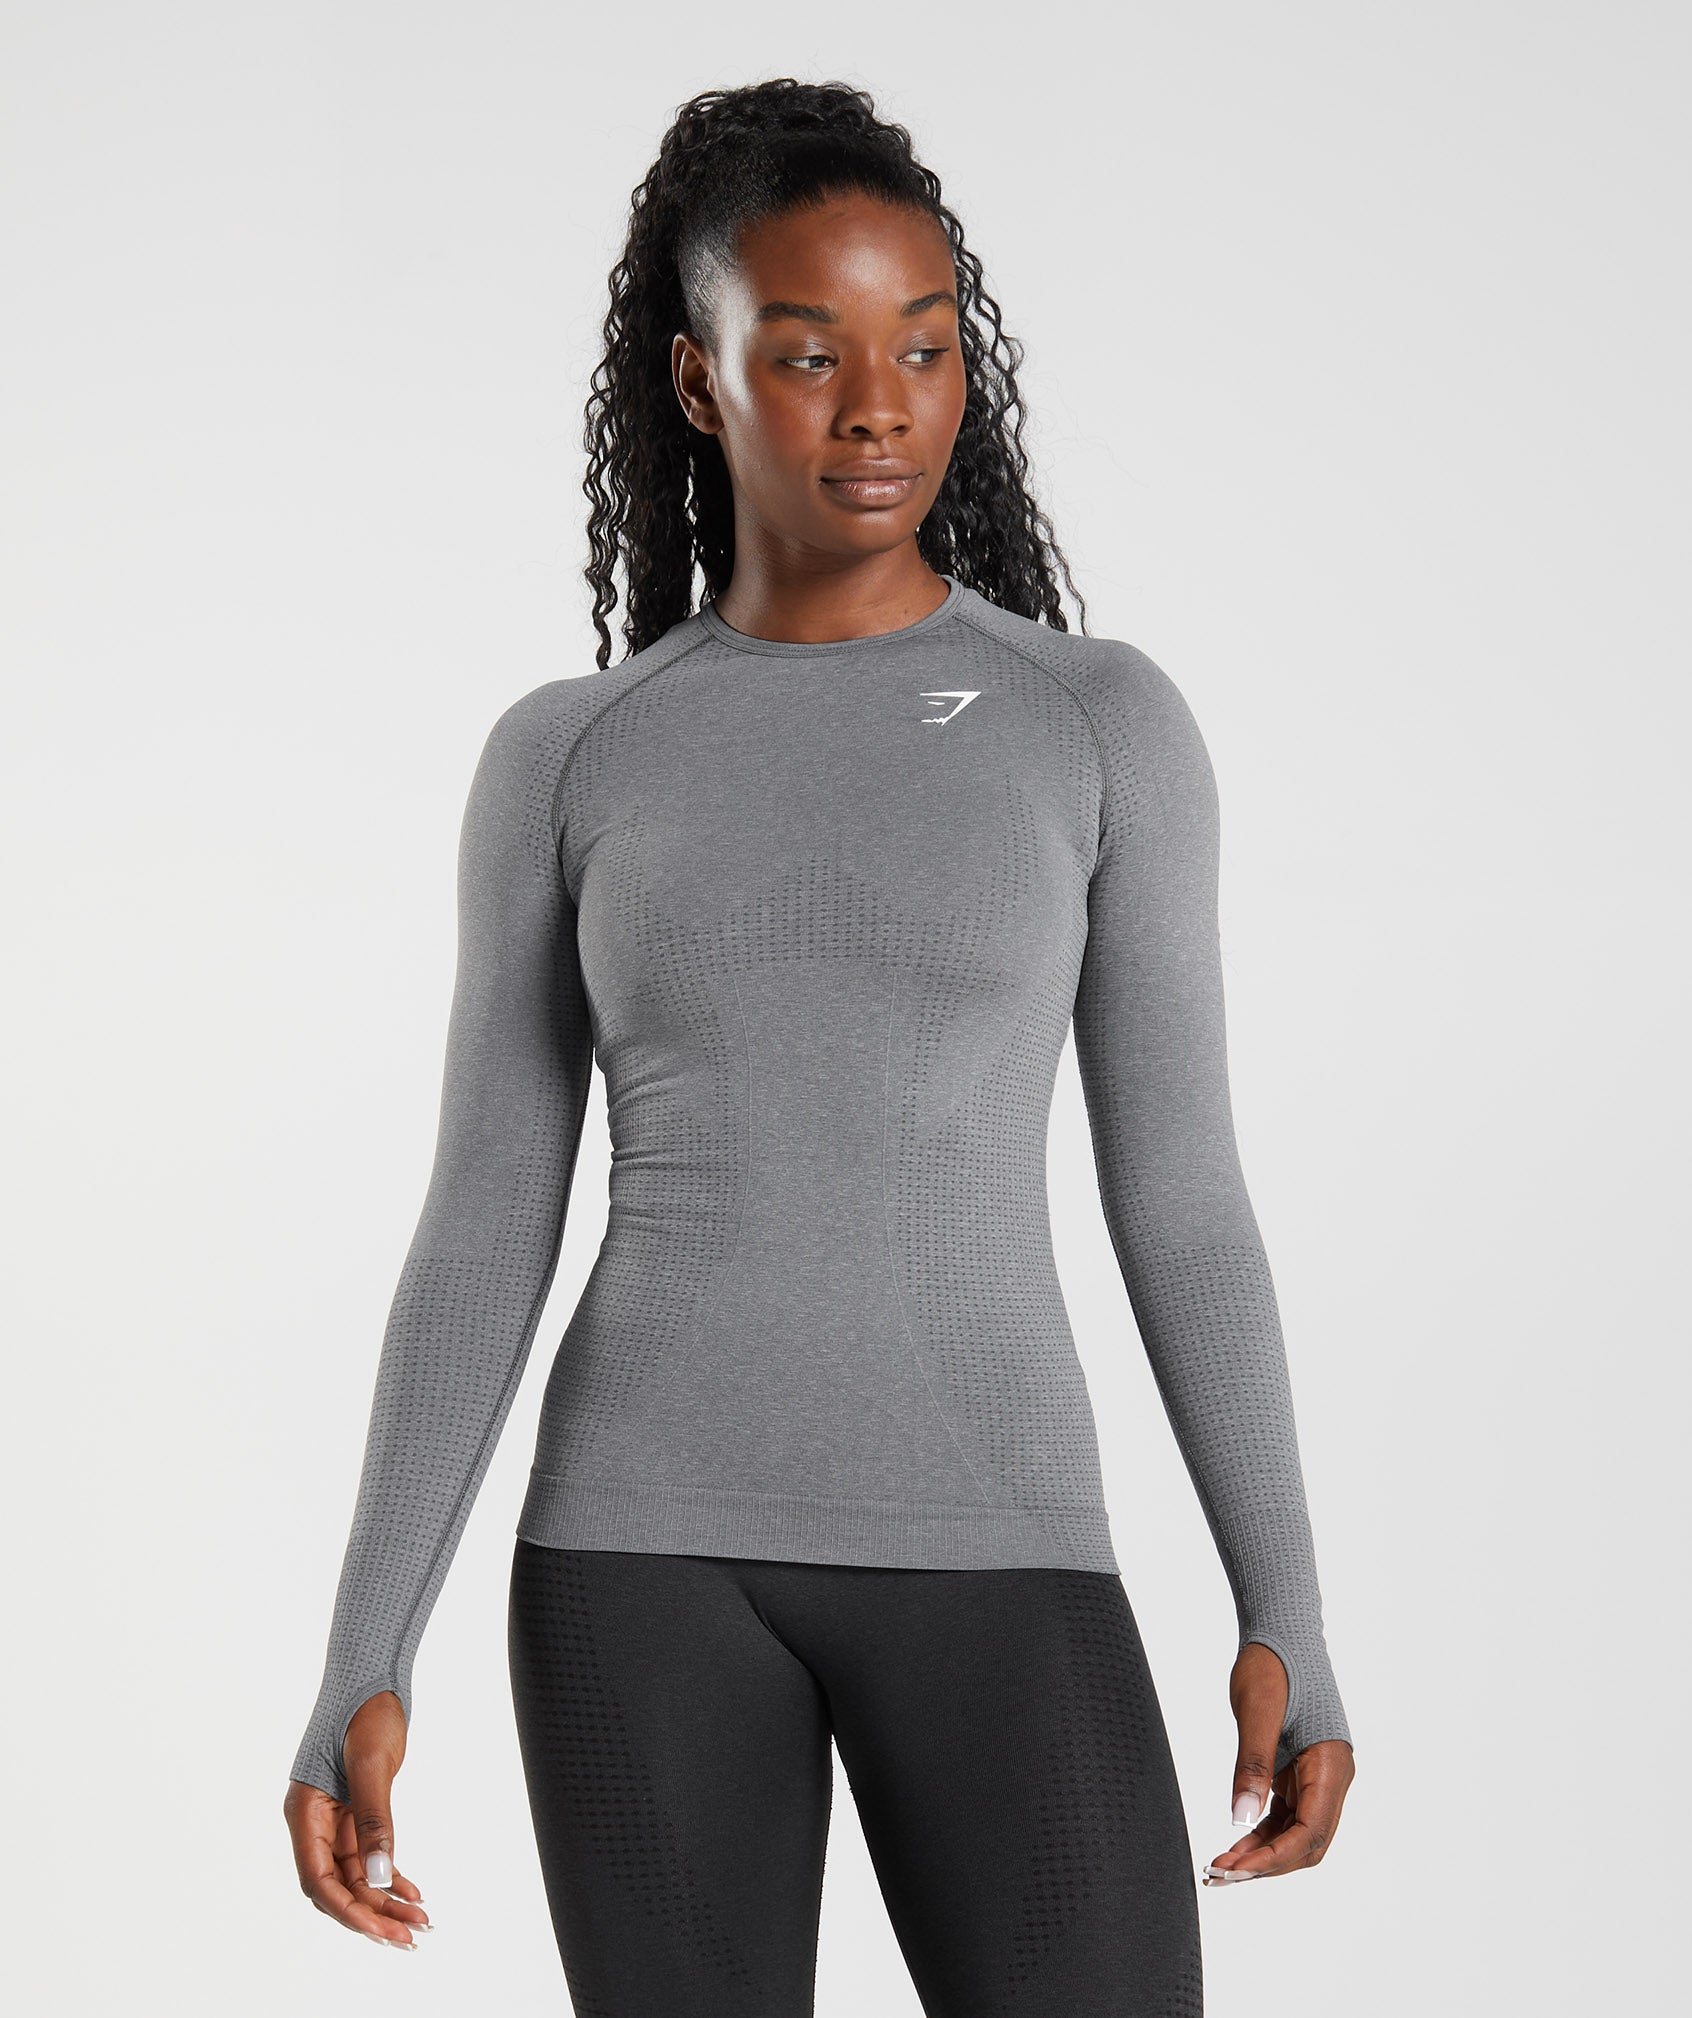 STING Allure Seamless Long Sleeve-Pink Marle – STING Australiaᵀᴹ